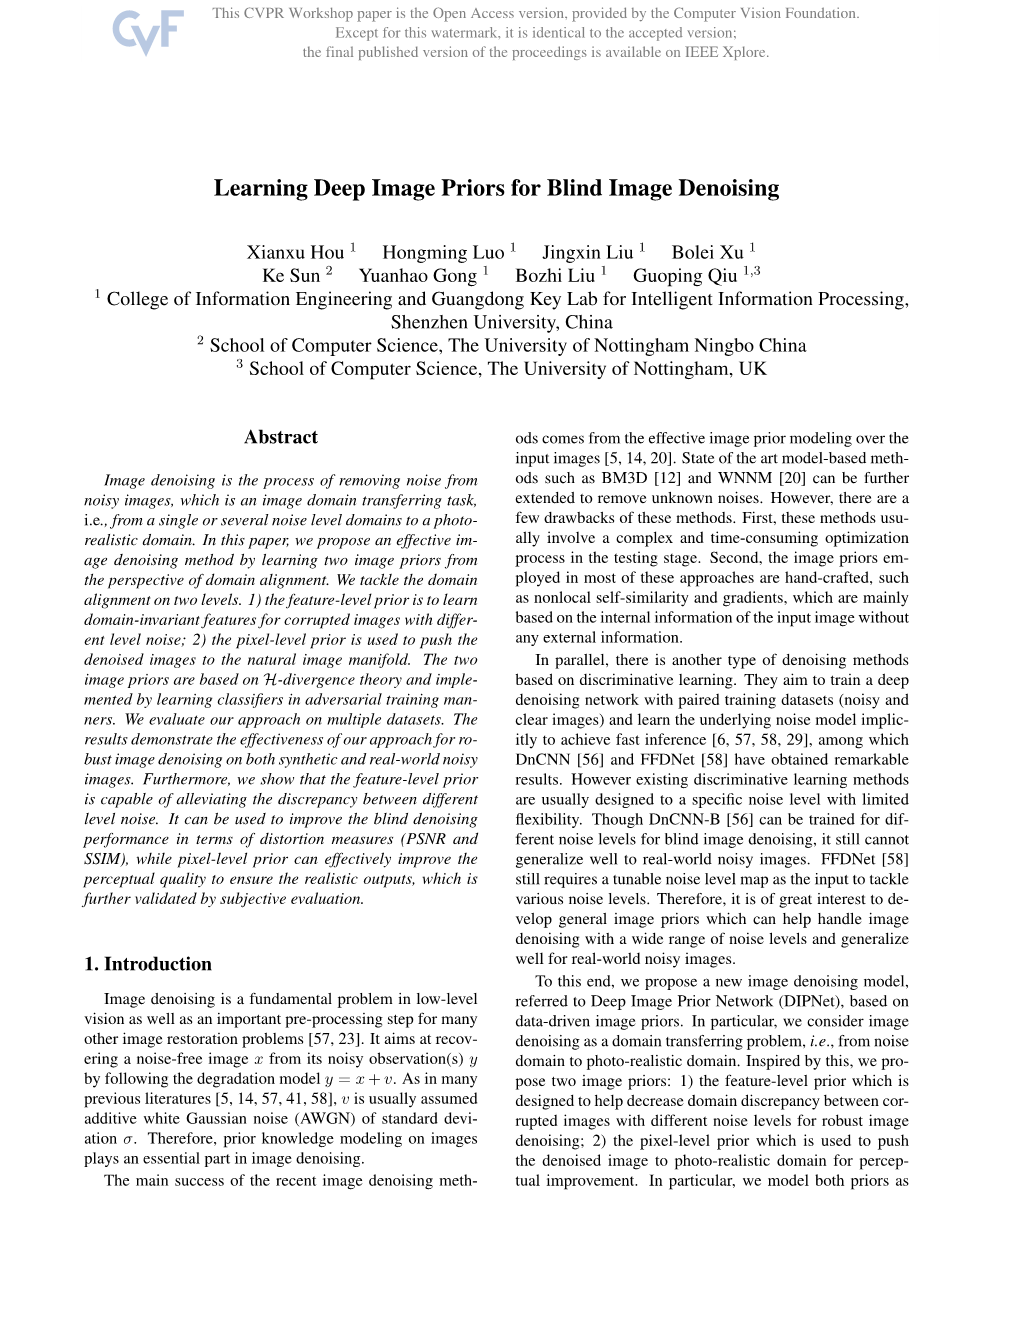 Learning Deep Image Priors for Blind Image Denoising